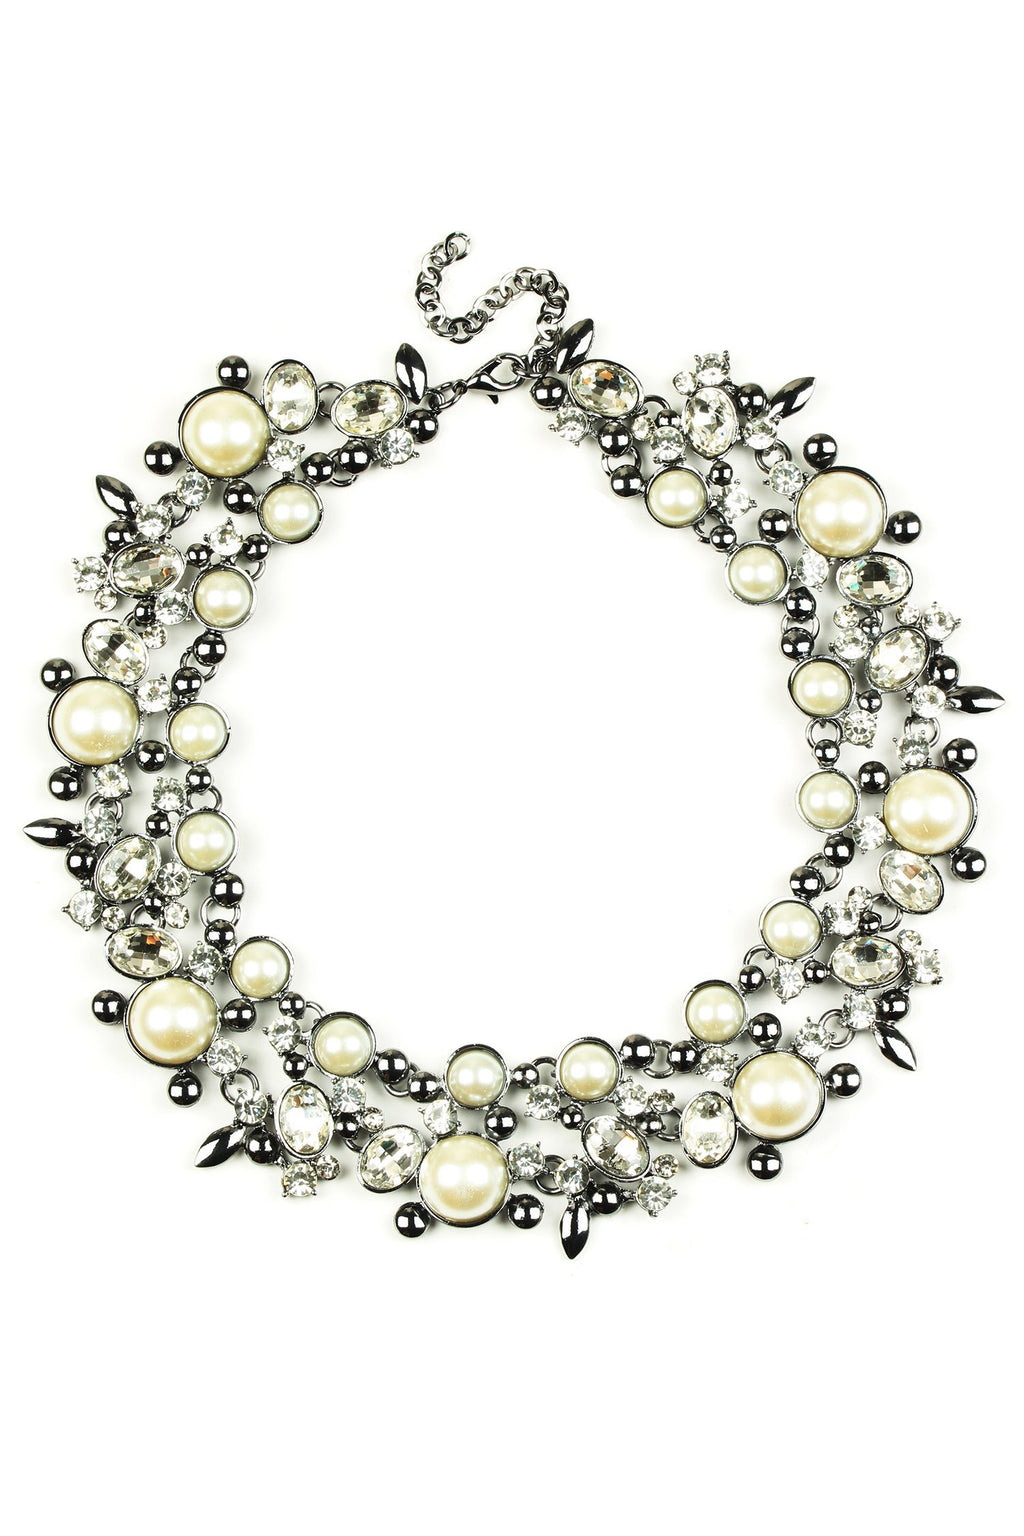 large statement necklace beaded with shiny pearls and glass crystals.